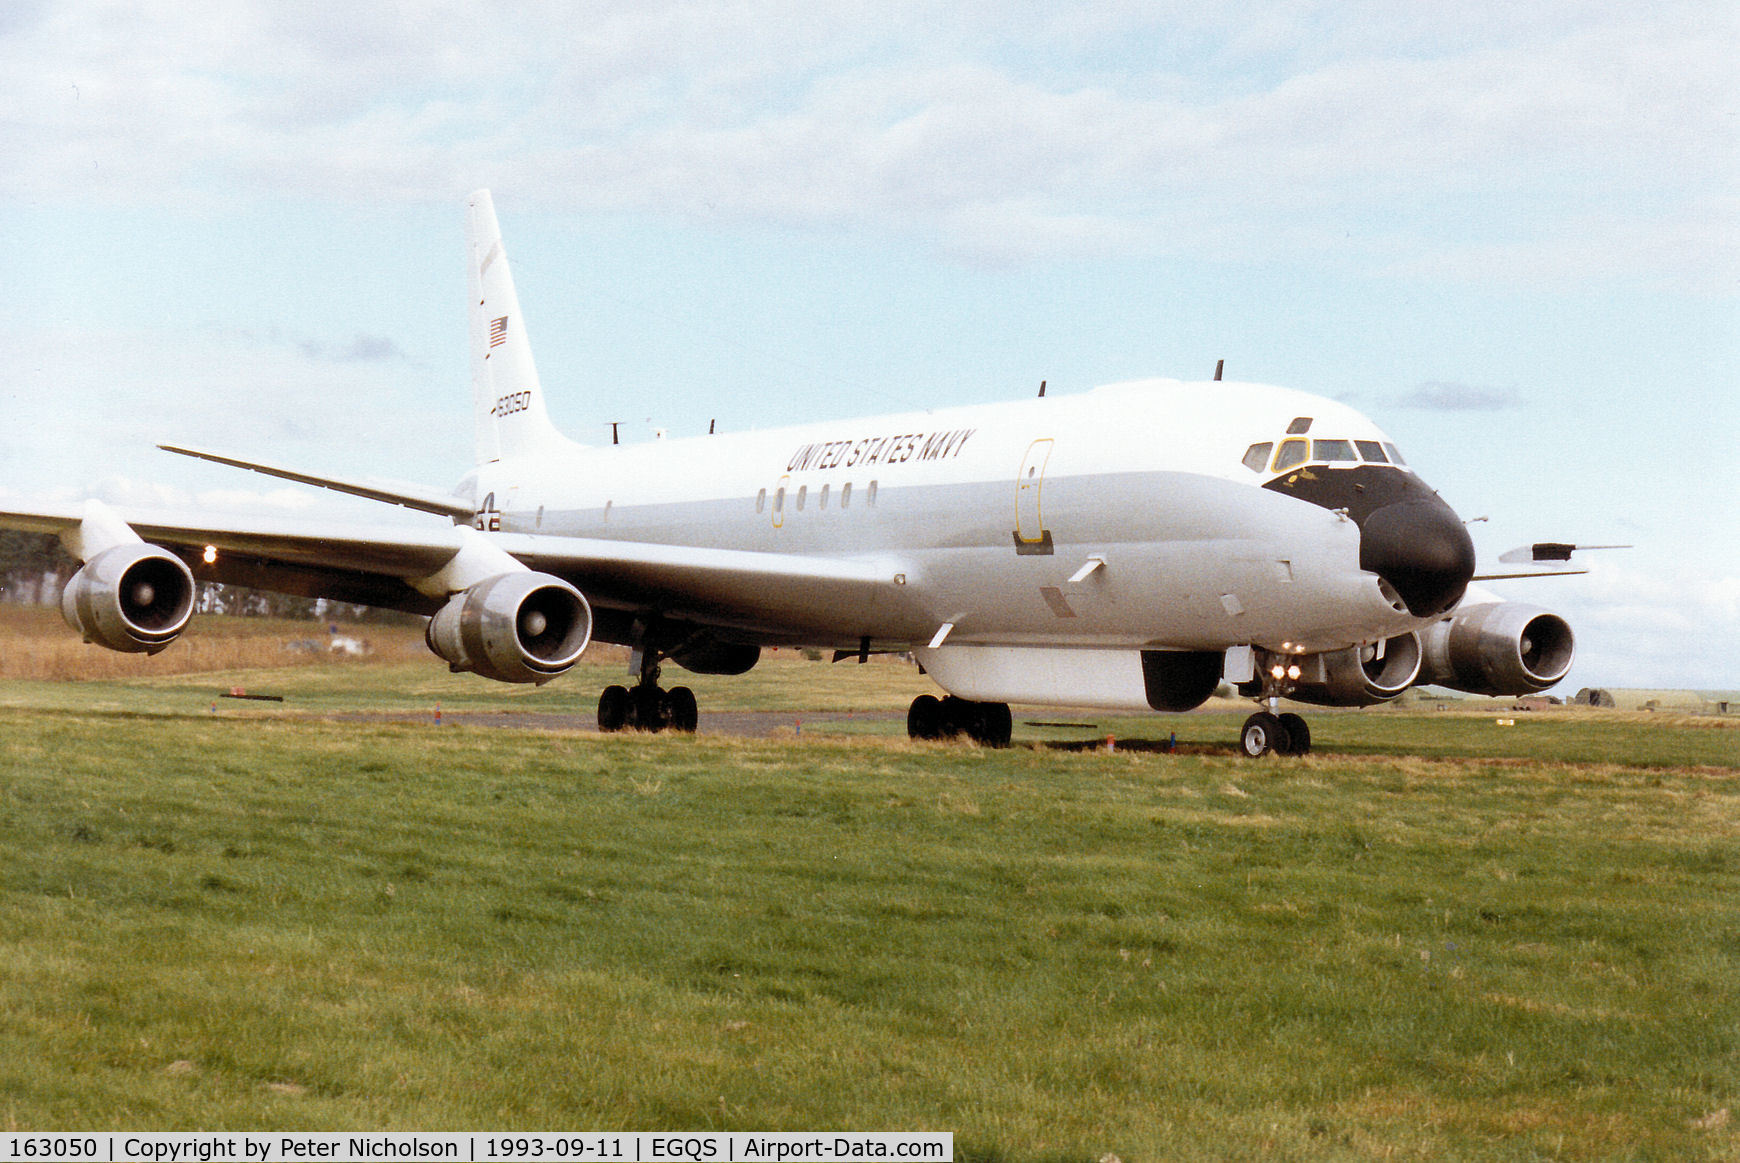 163050, 1966 McDonnell Douglas EC-24A (DC-8-54F) C/N 45881, US Navy's Fleet Electronic Warfare Support Group EC-24A taxying to the active runway at RAF Lossiemouth for an Exerise Solid Stance mission in September 1993.